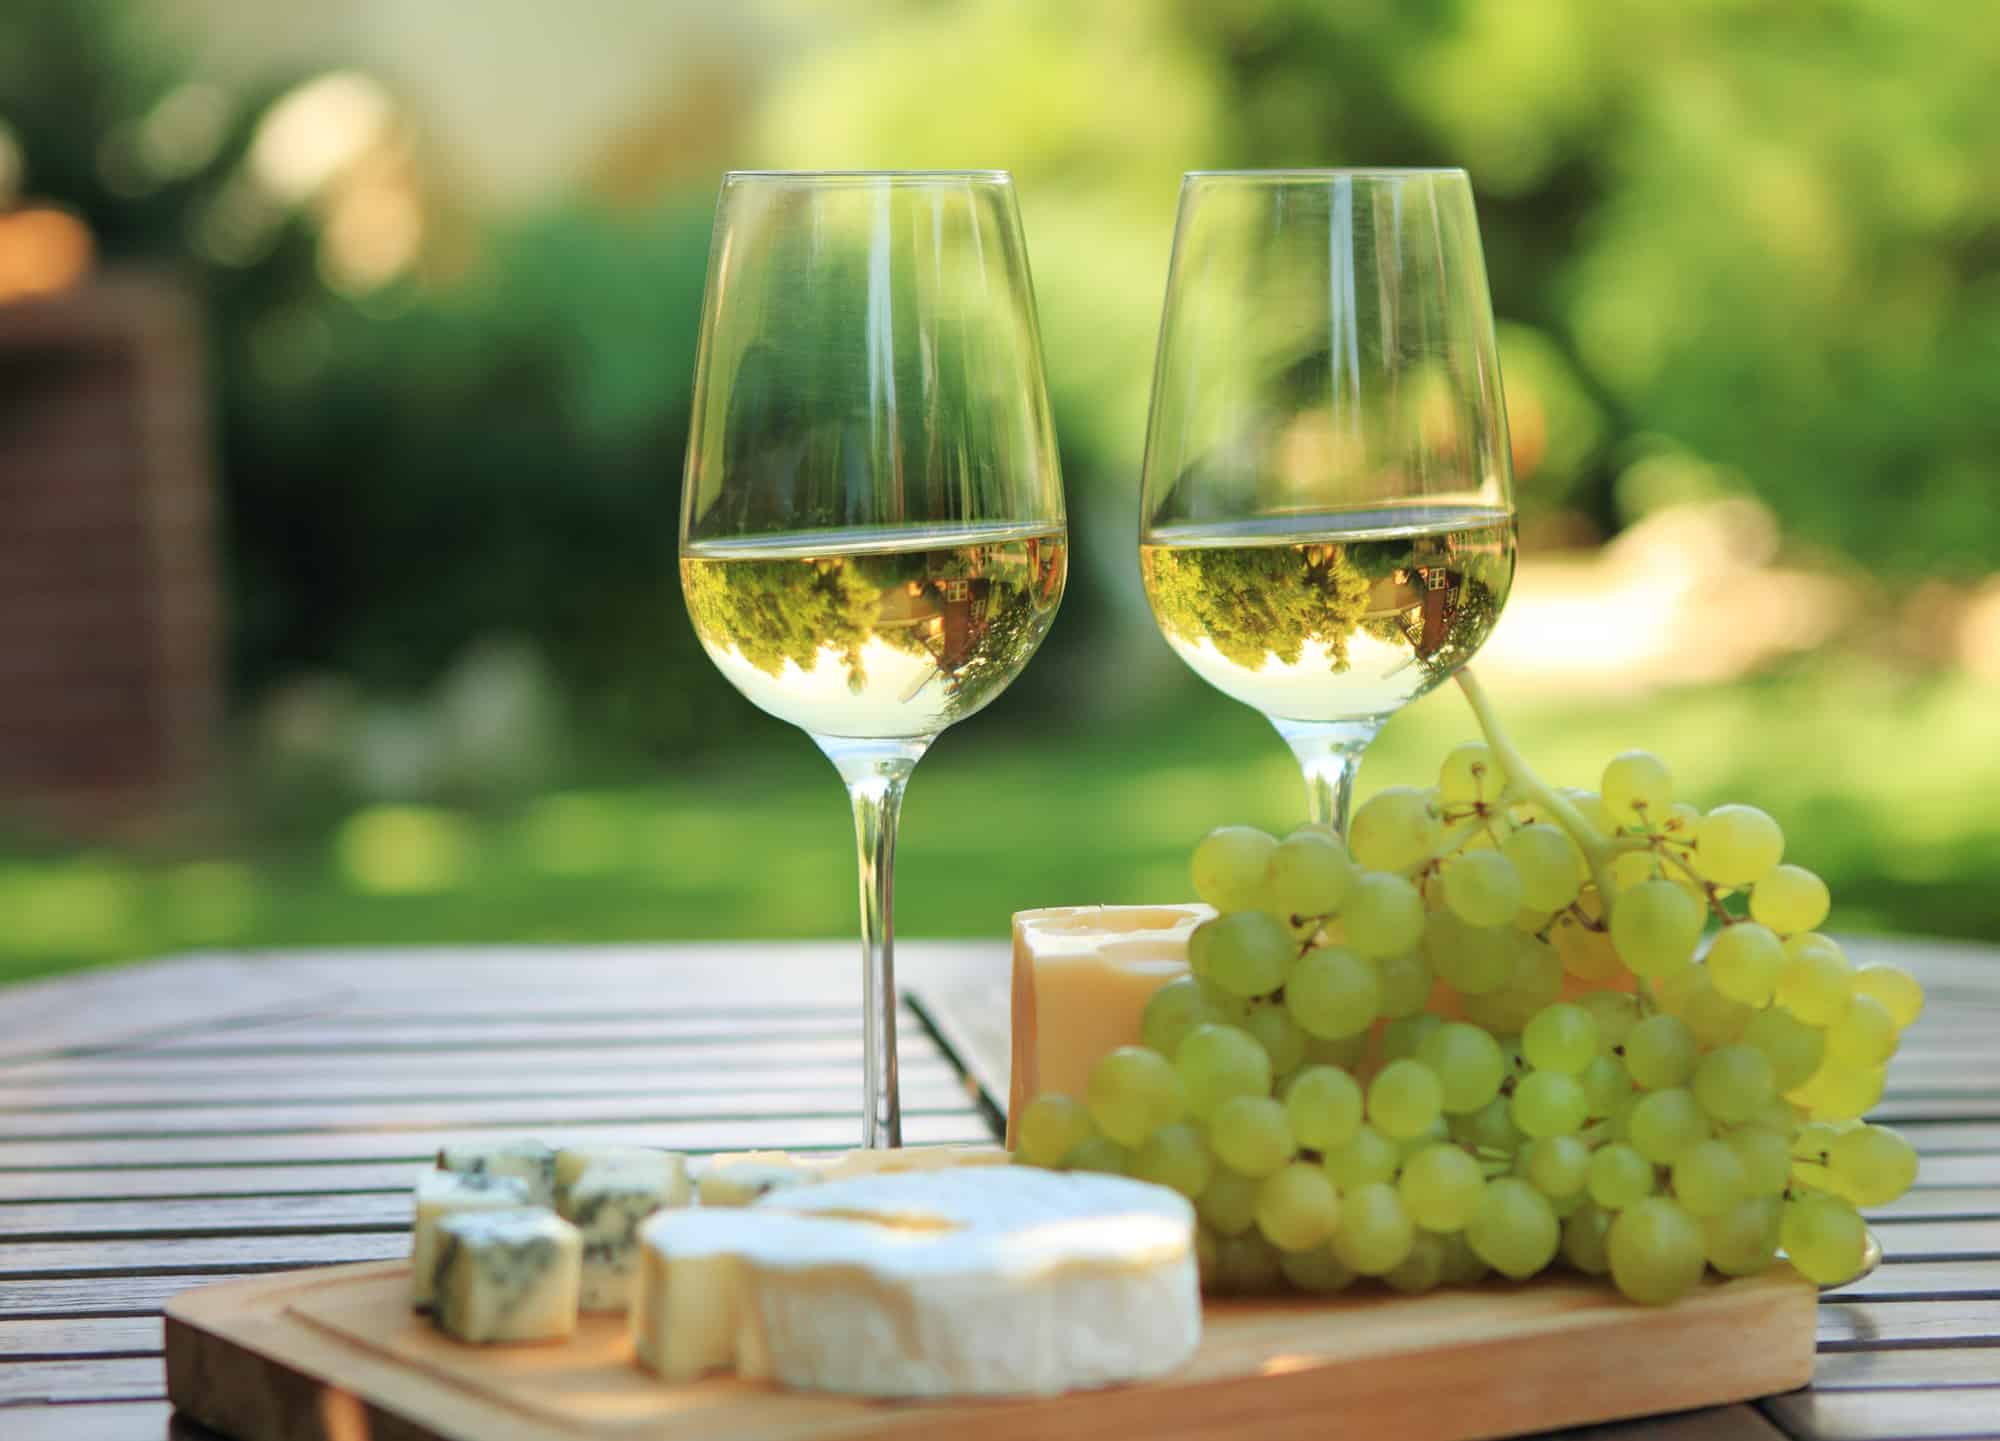 Various sorts of cheese, grapes and two glasses of the white wine